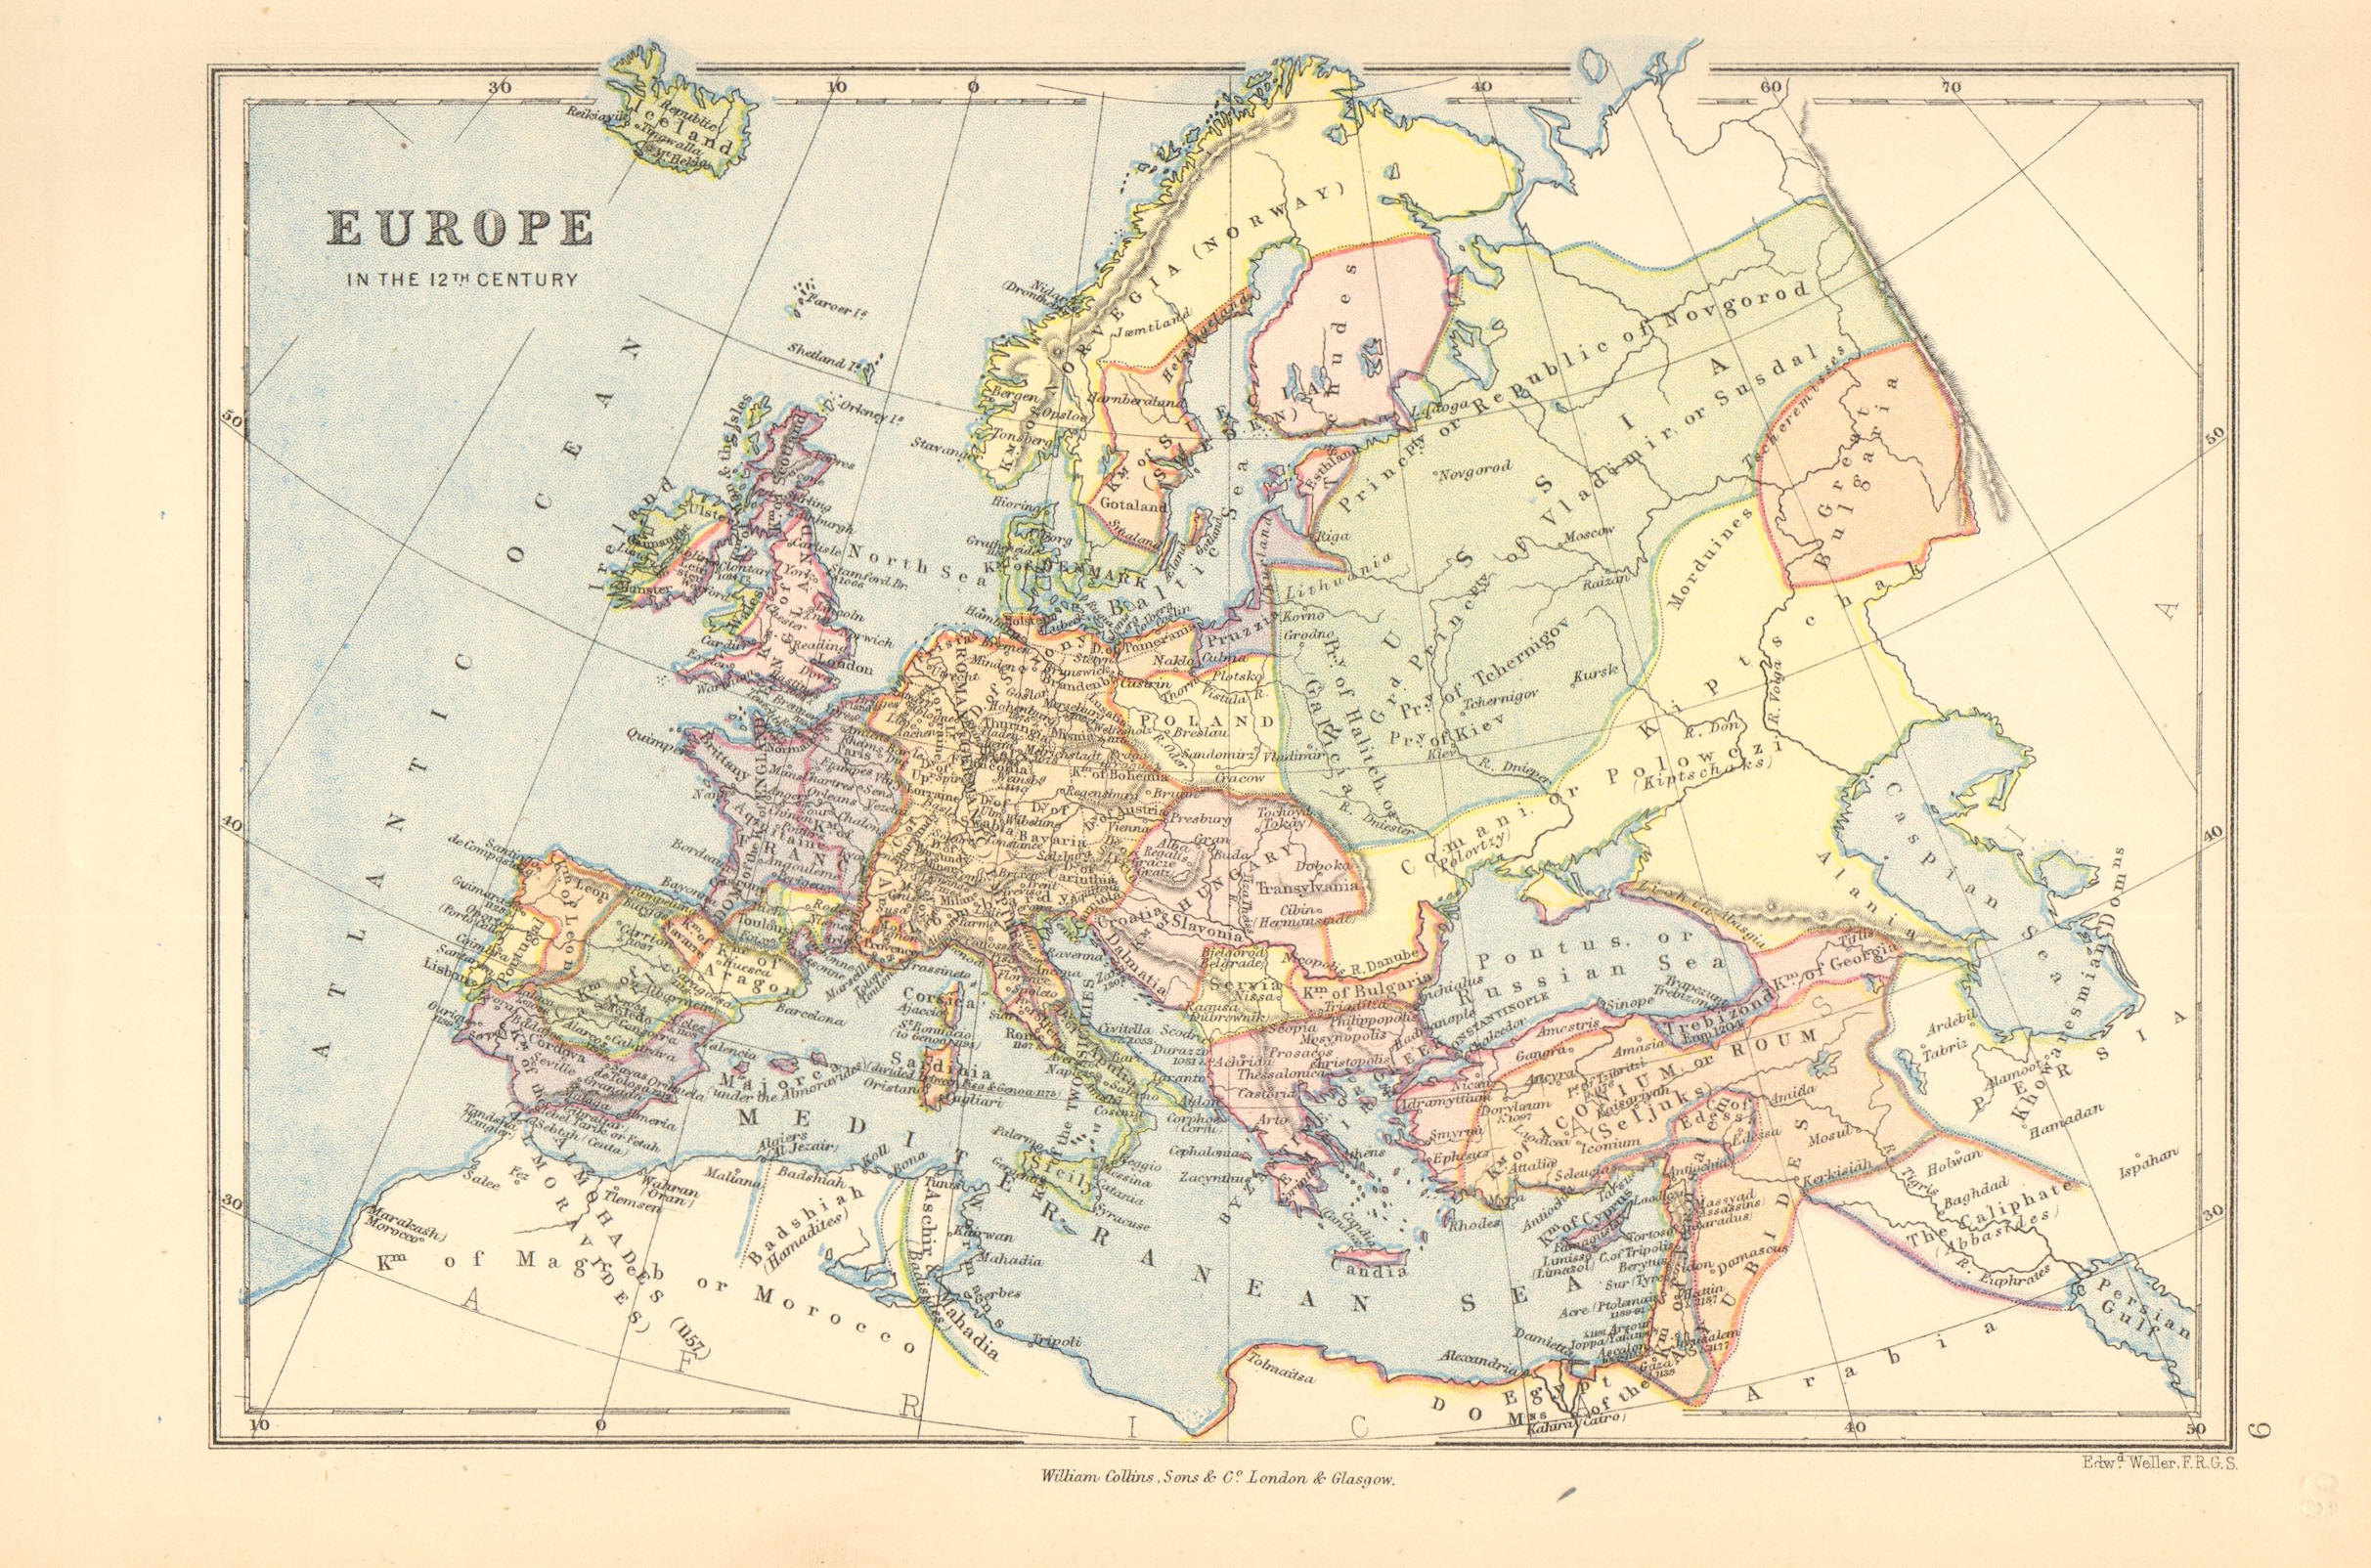 Associate Product 'Europe in the 12th Century'. BARTHOLOMEW 1876 old antique map plan chart